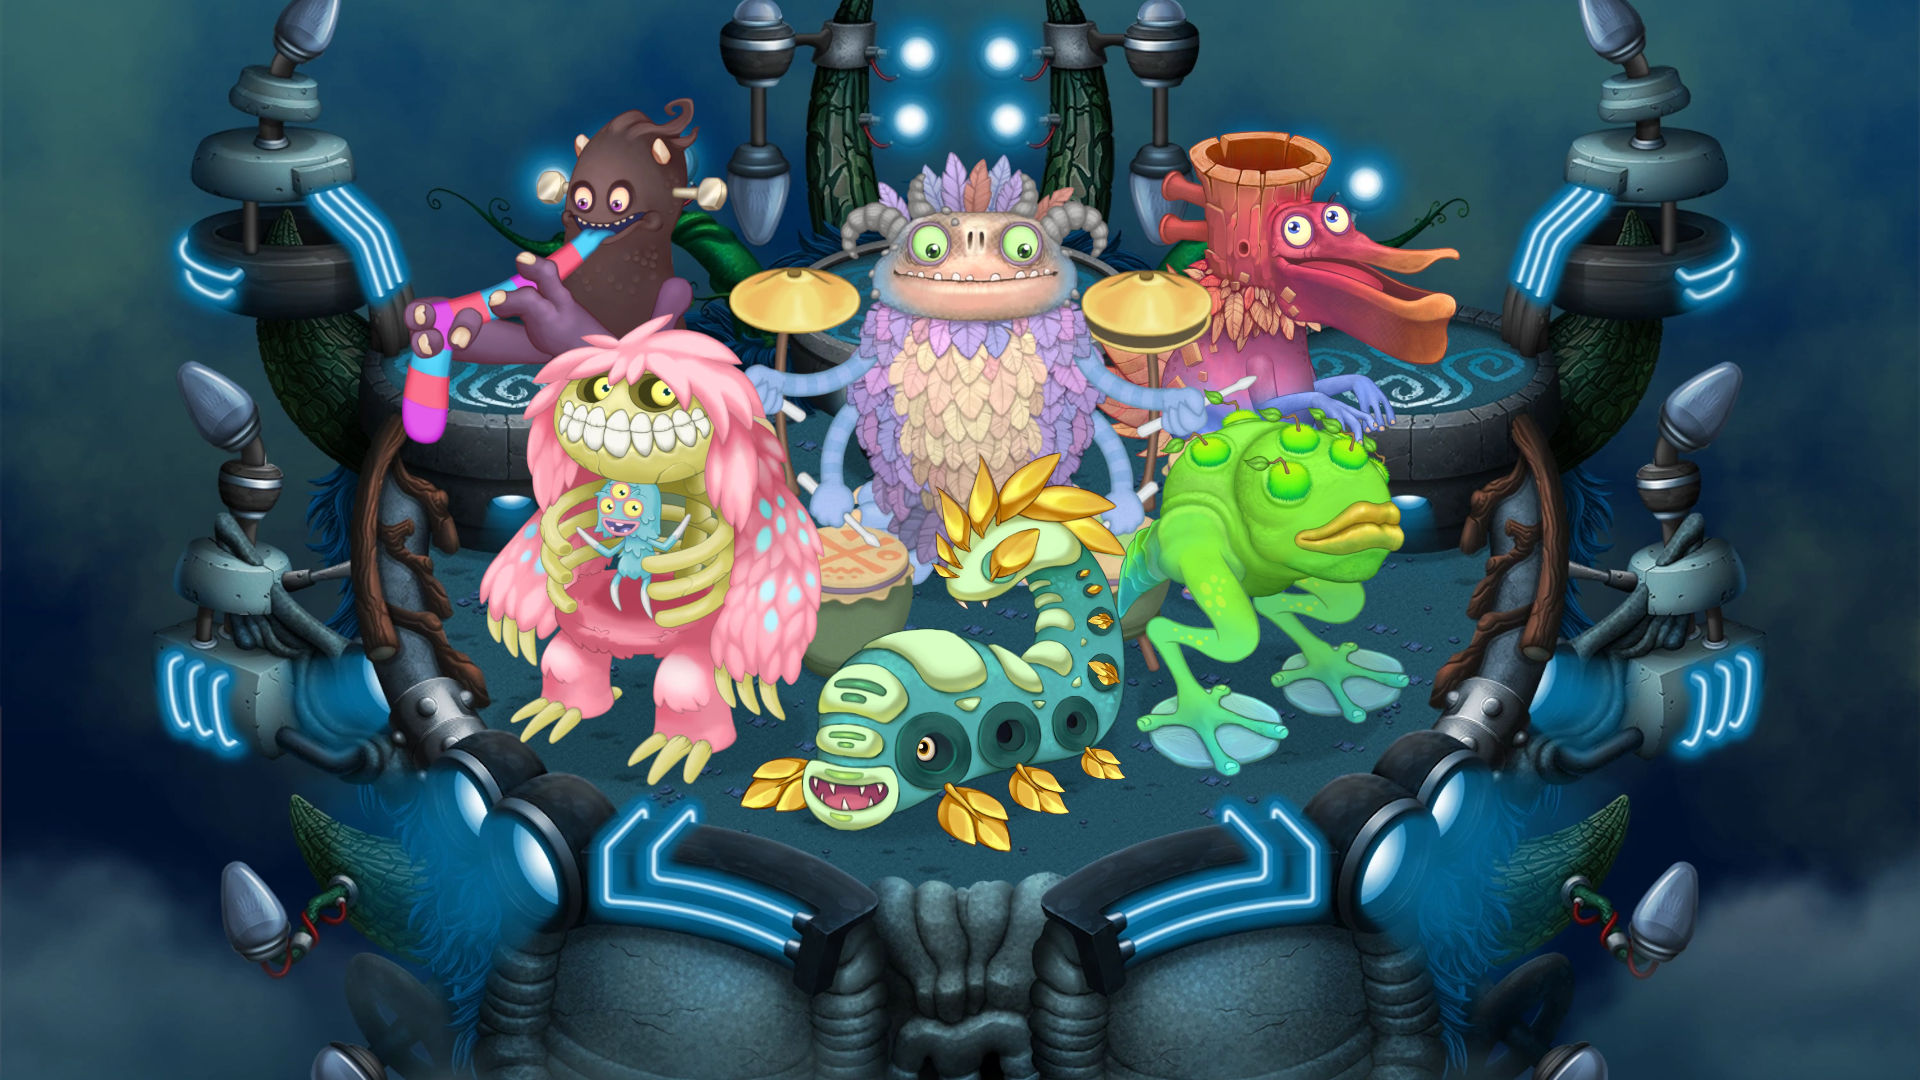 Mammott over Earth epic wubbox [My Singing Monsters] [Mods]